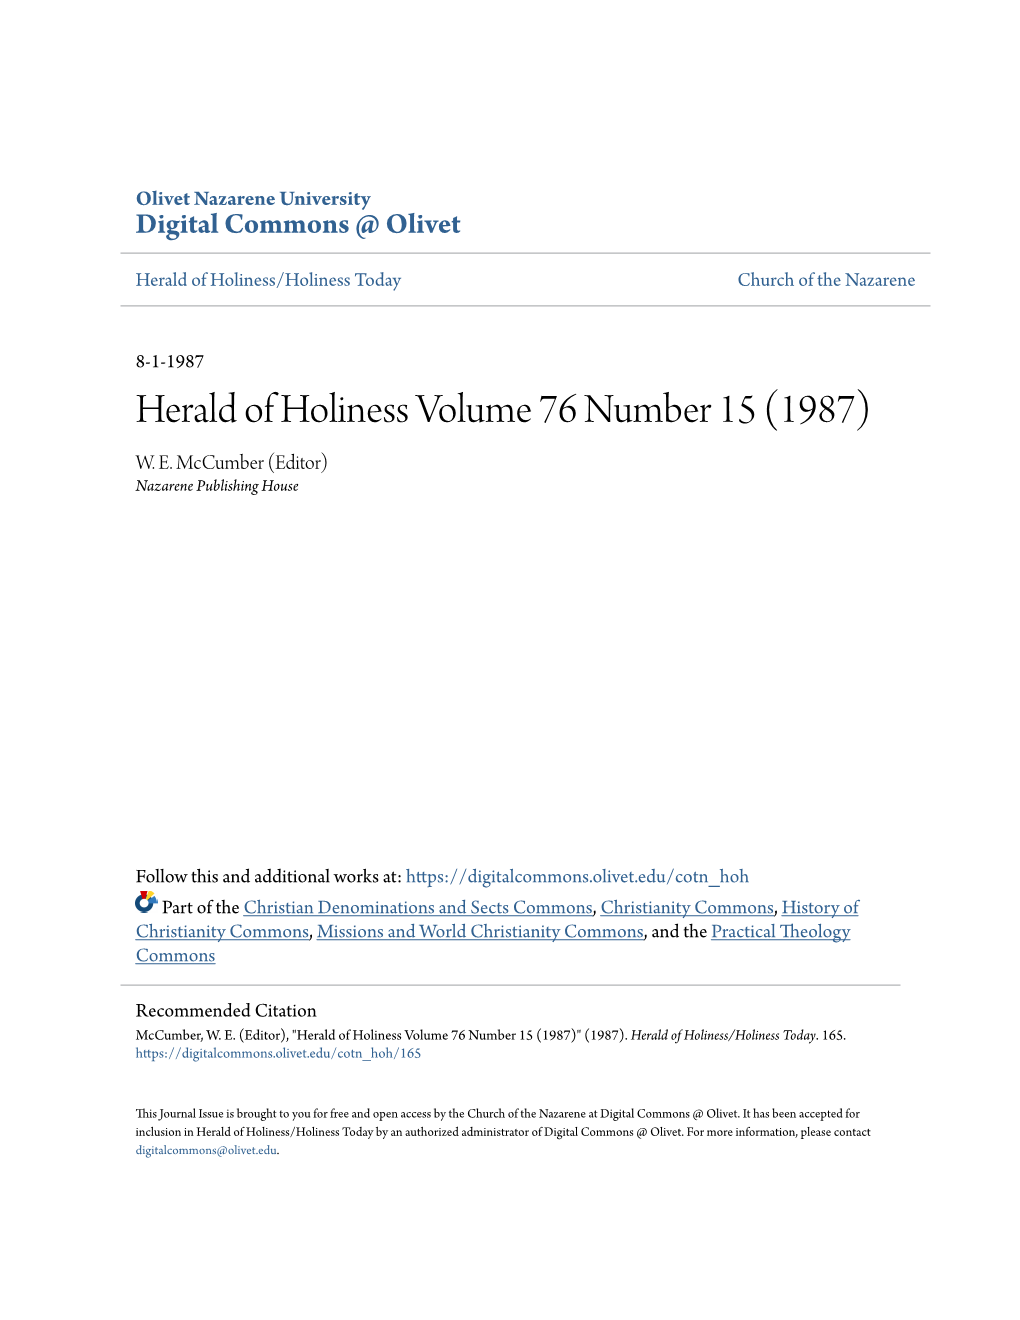 Herald of Holiness Volume 76 Number 15 (1987) W